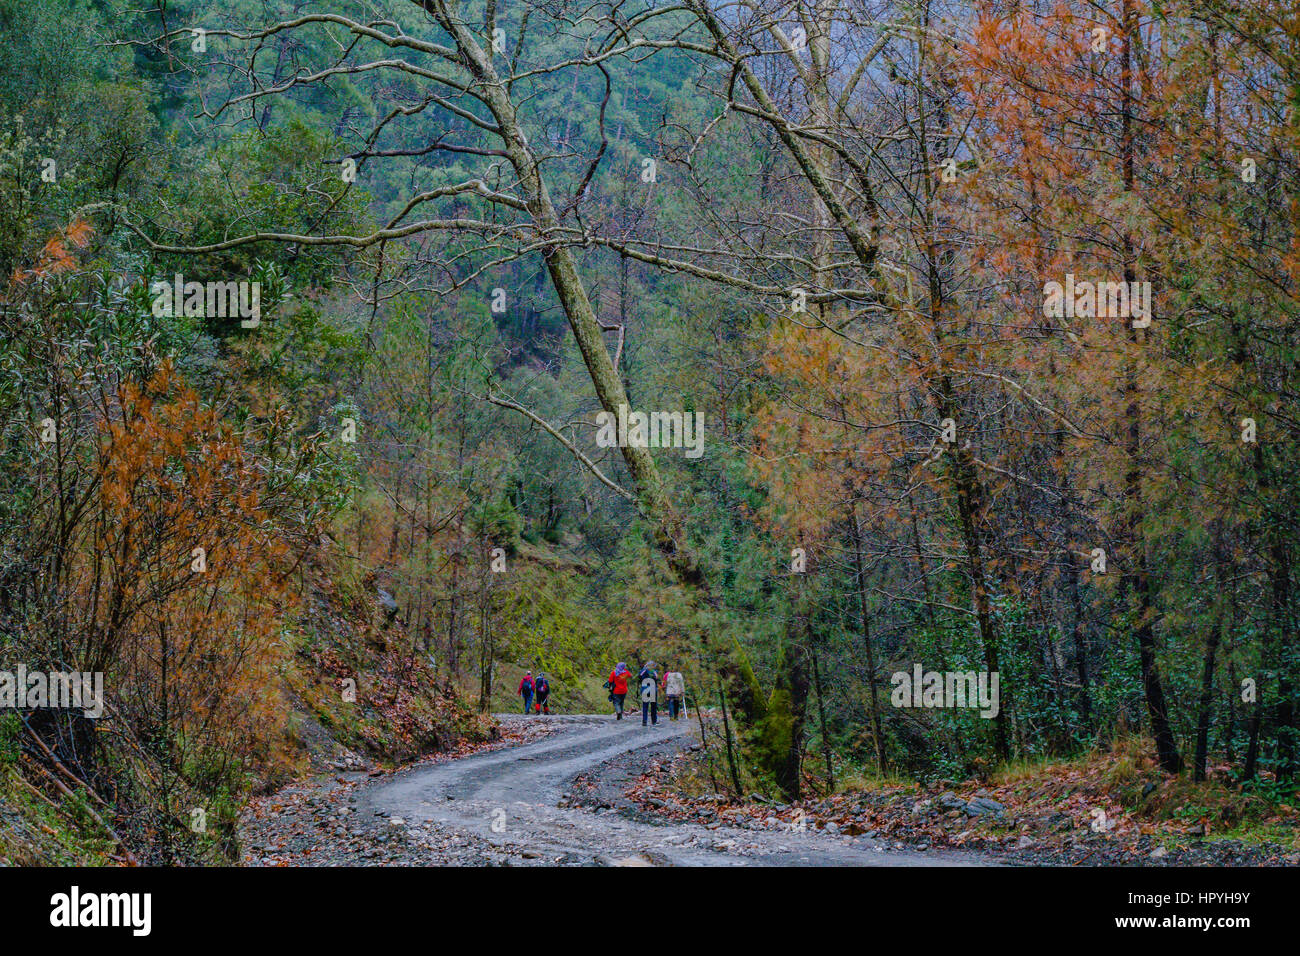 Perfect autumn scene,people are walking in the forest folllowing the hiking pathway covered with colourfull trees. muhtesem sonbahar manzarasi Stock Photo